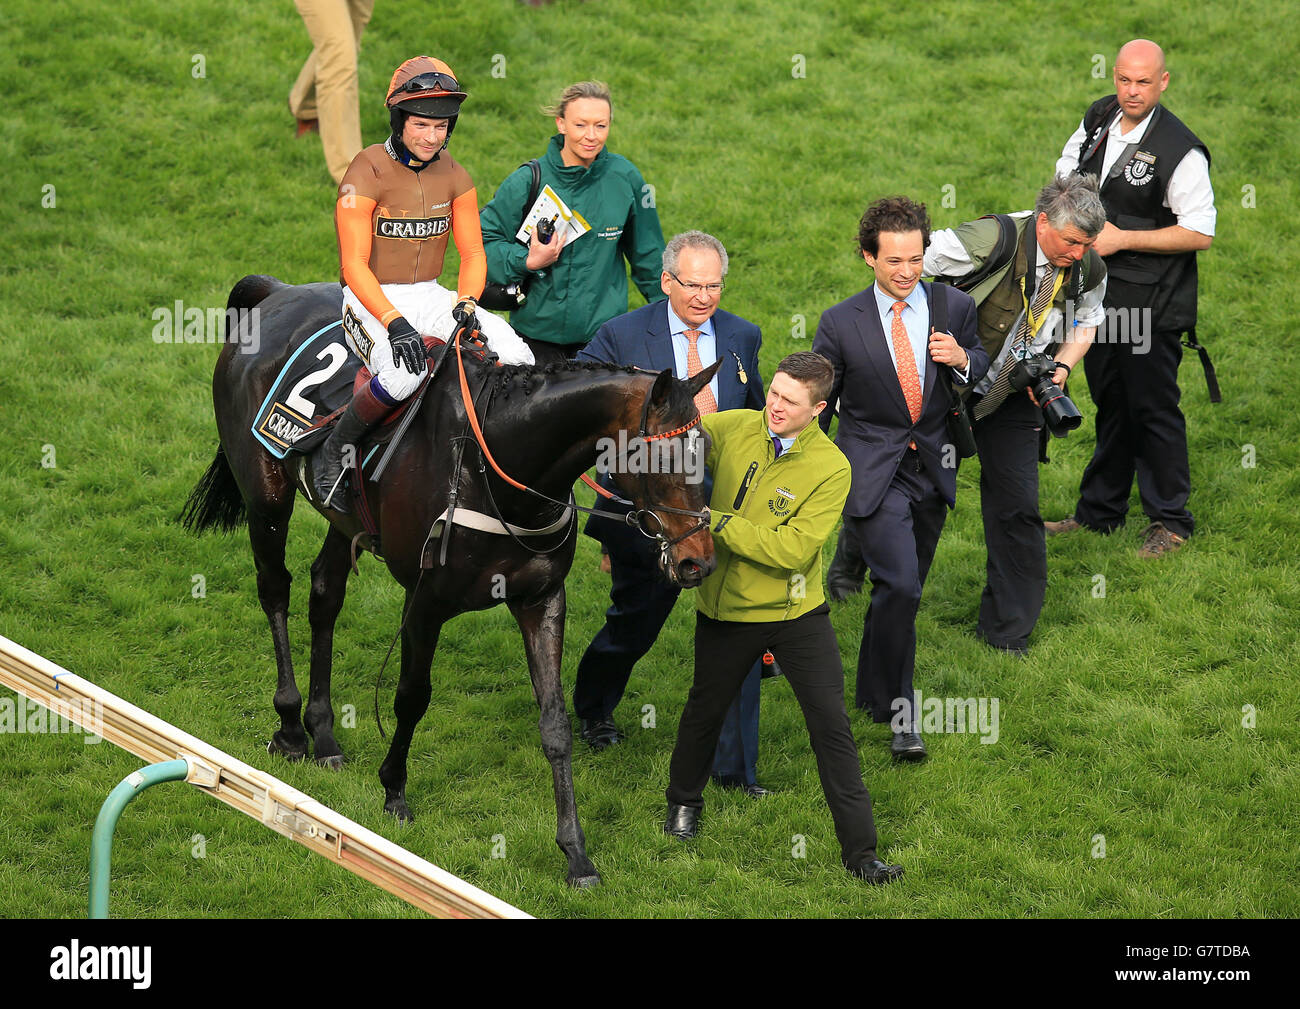 Rajdhani Express ridden by Sam Waley-Cohen after winning the Crabbie's Topham Chase on Ladies Day of the Crabbies Grand National Festival at Aintree Racecourse, Liverpool. PRESS ASSOCIATION Photo. Picture date: Friday April 10, 2015. See PA story RACING Aintree. Photo credit should read: Mike Egerton/PA Wire Stock Photo